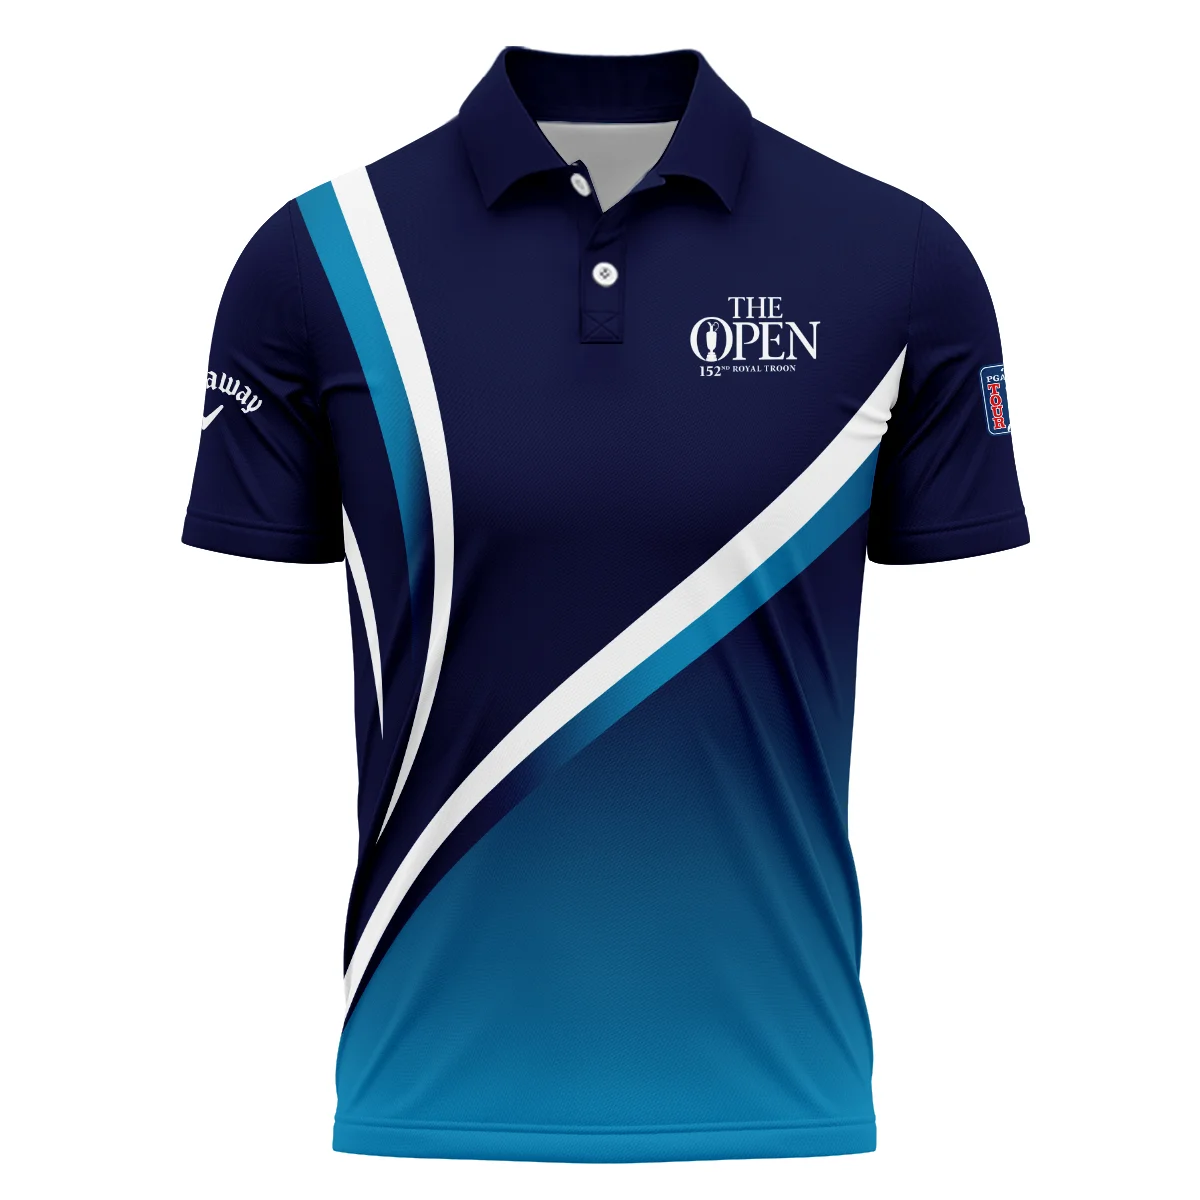 Callaway 152nd Open Championship Dark Blue Gradient White Abstract Background Polo Shirt All Over Prints HOTOP260624A03CLWPL